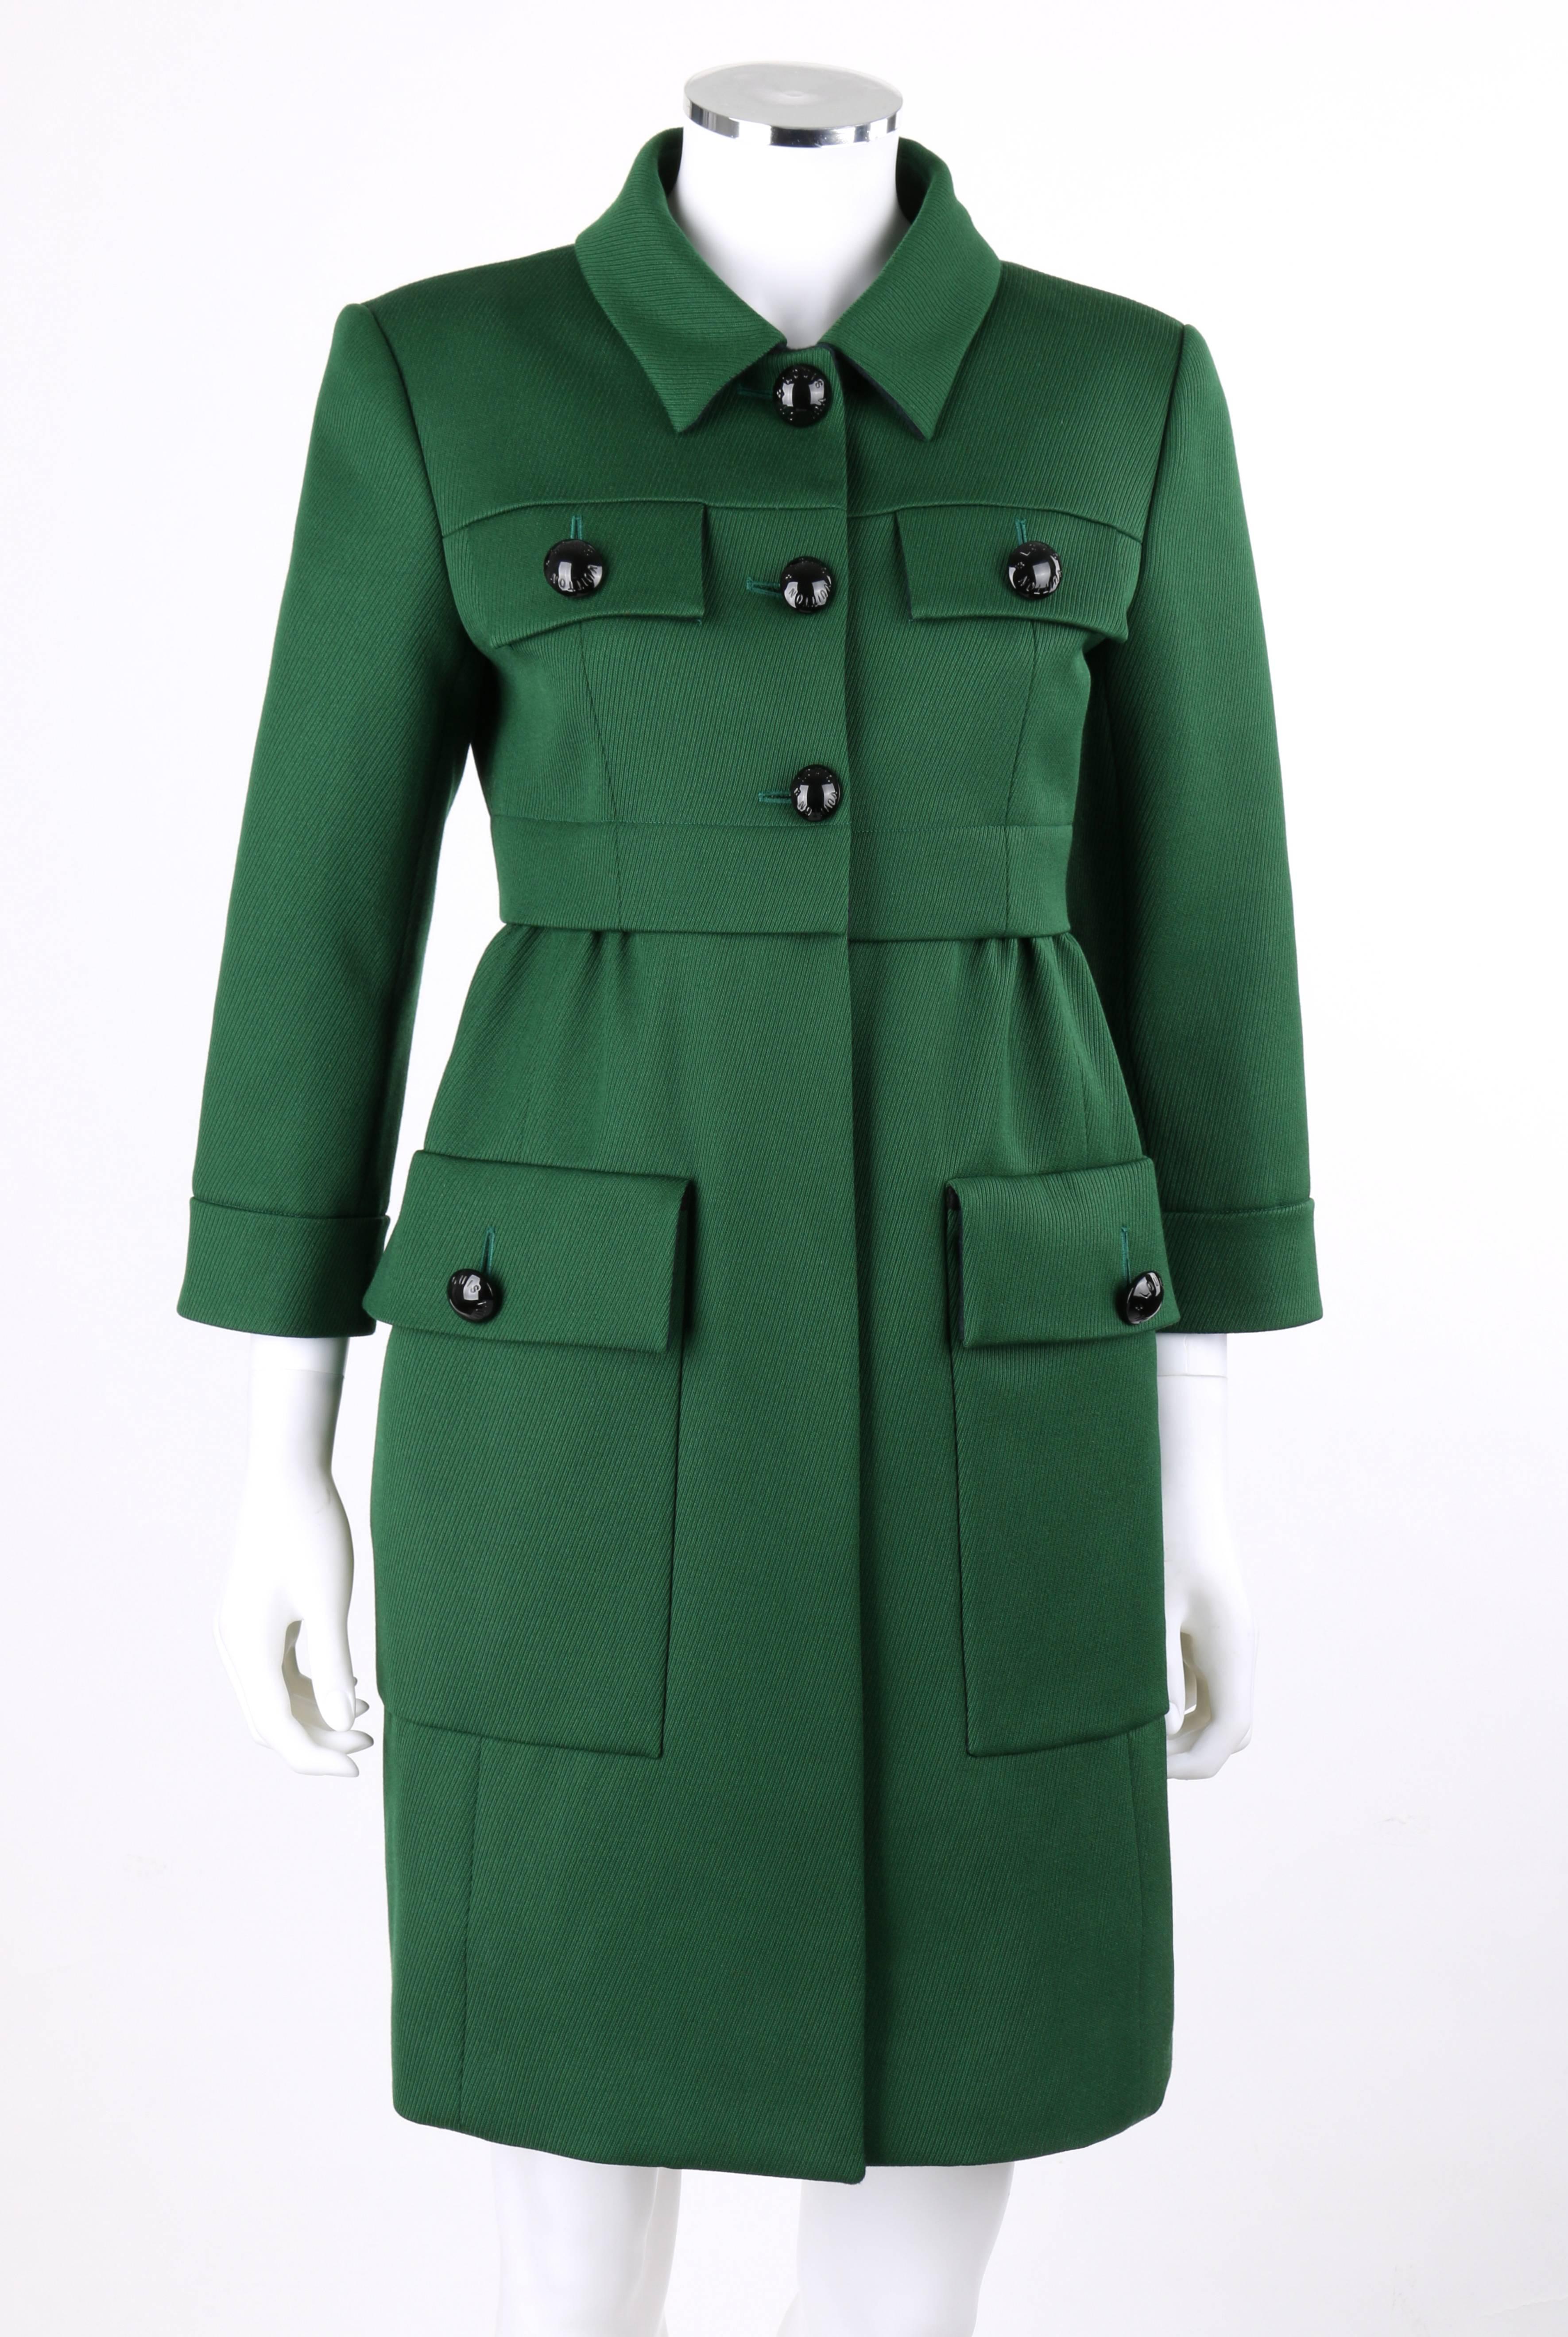 Louis Vuitton Pre-Fall 2012 emerald green wool with cashmere three button car coat; New with tags. Runway look #20. 3/4 length sleeves with single button closure at cuff. Signature 